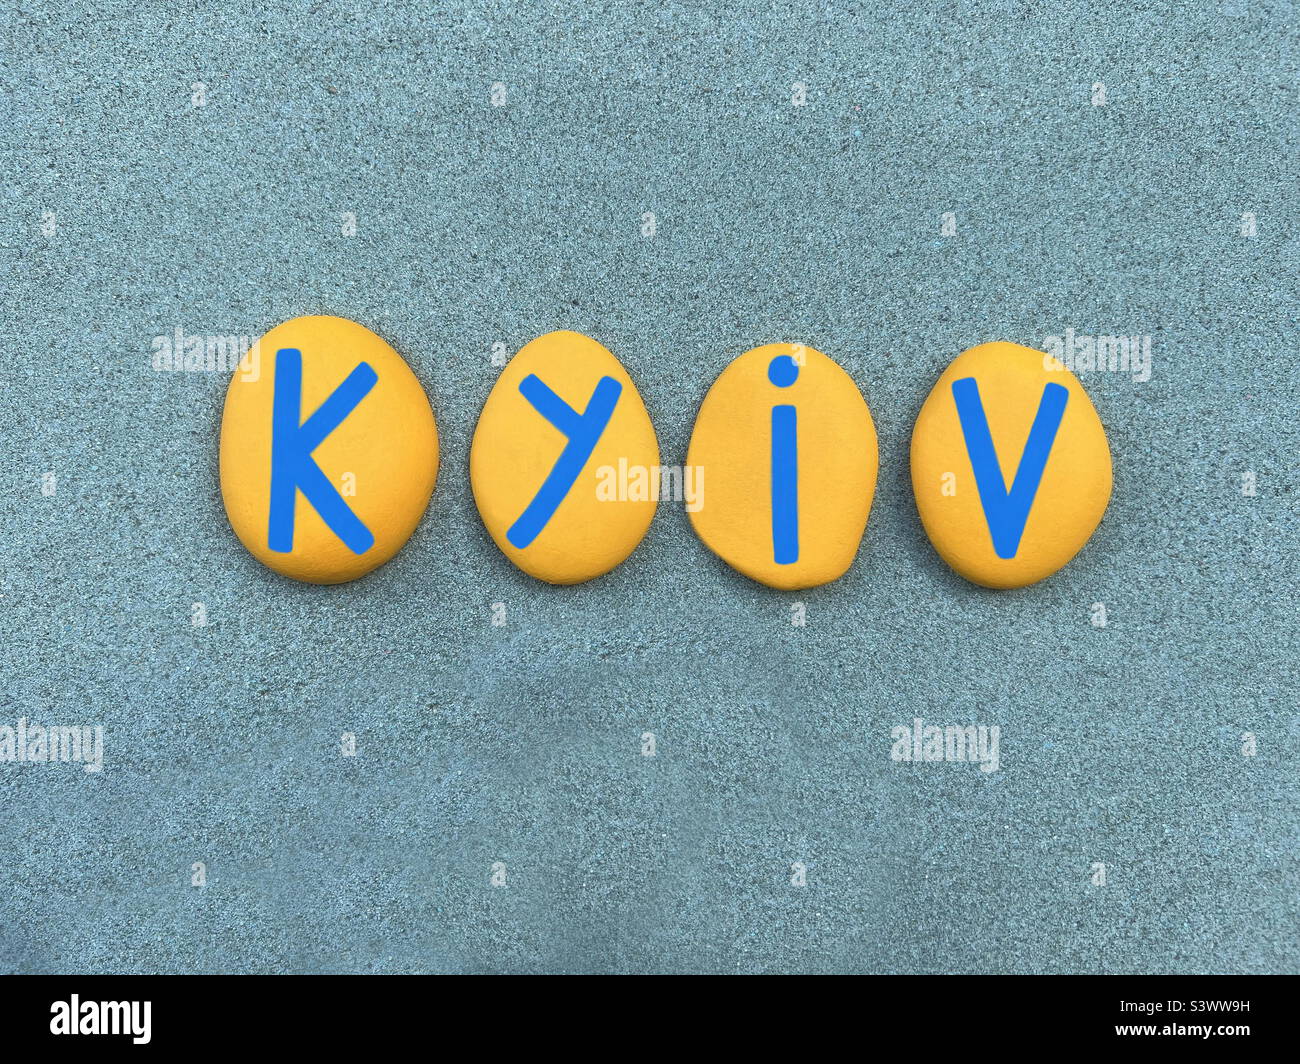 Kyiv, capitol of Ukraine composed with yellow and blue hand painted stone letters over green sand Stock Photo